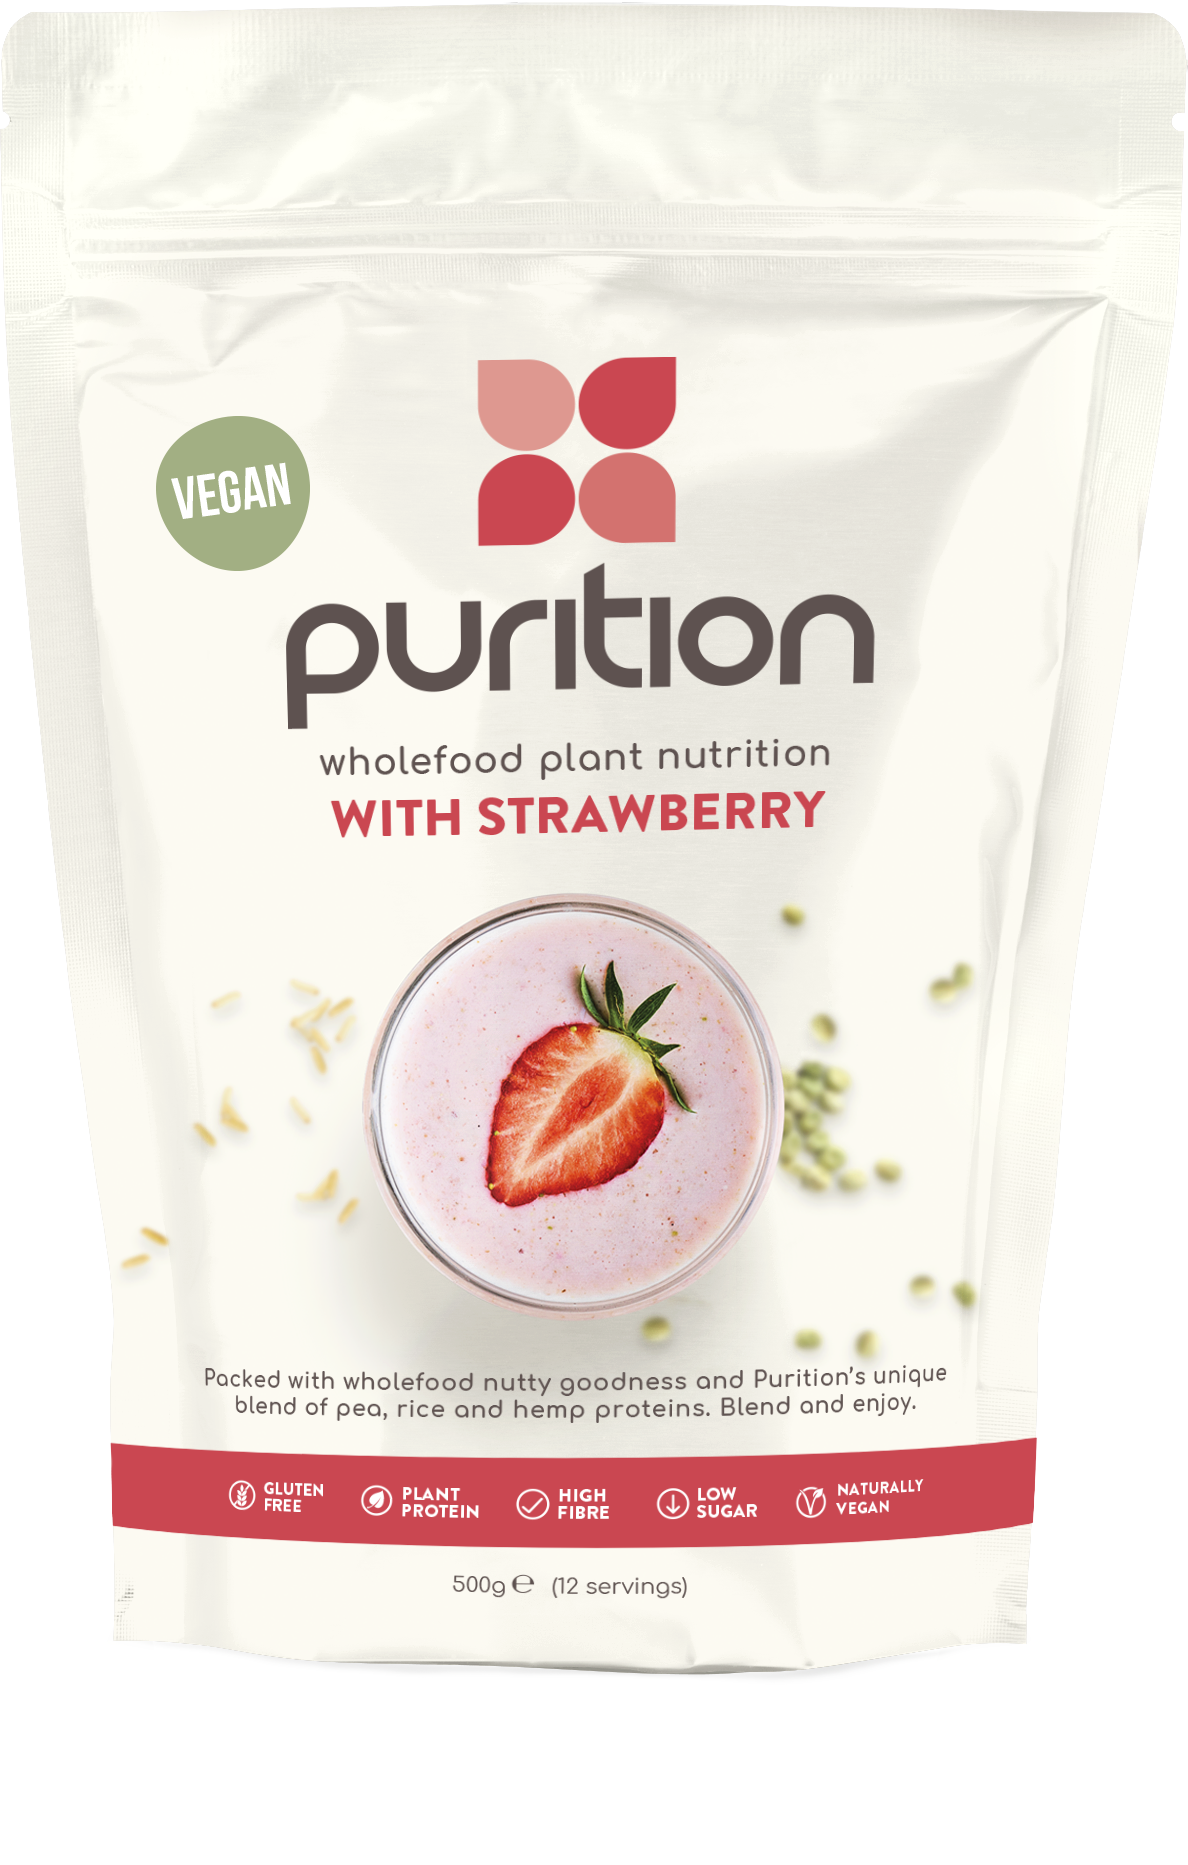 Purition VEGAN Wholefood Plant Nutrition With Strawberry